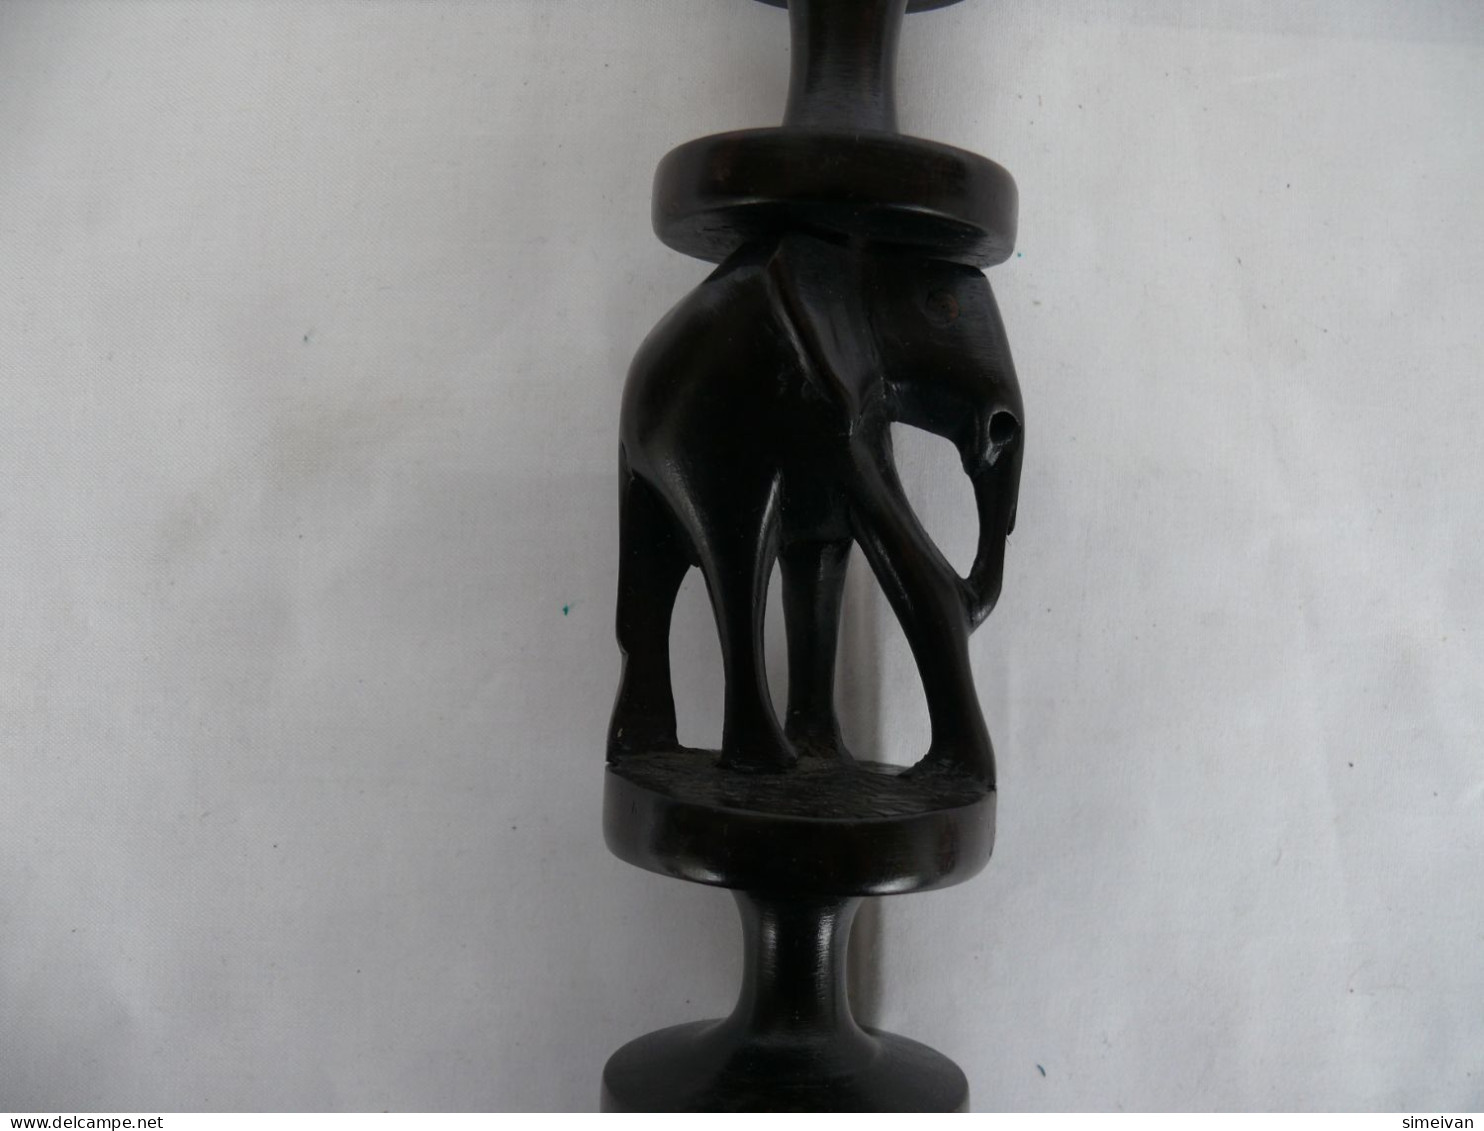 BEAUTIFUL WOODEN AFRICAN HAND CARVED ELEPHANT CANDLESTICK HOLDER #1629 - Chandeliers, Candelabras & Candleholders